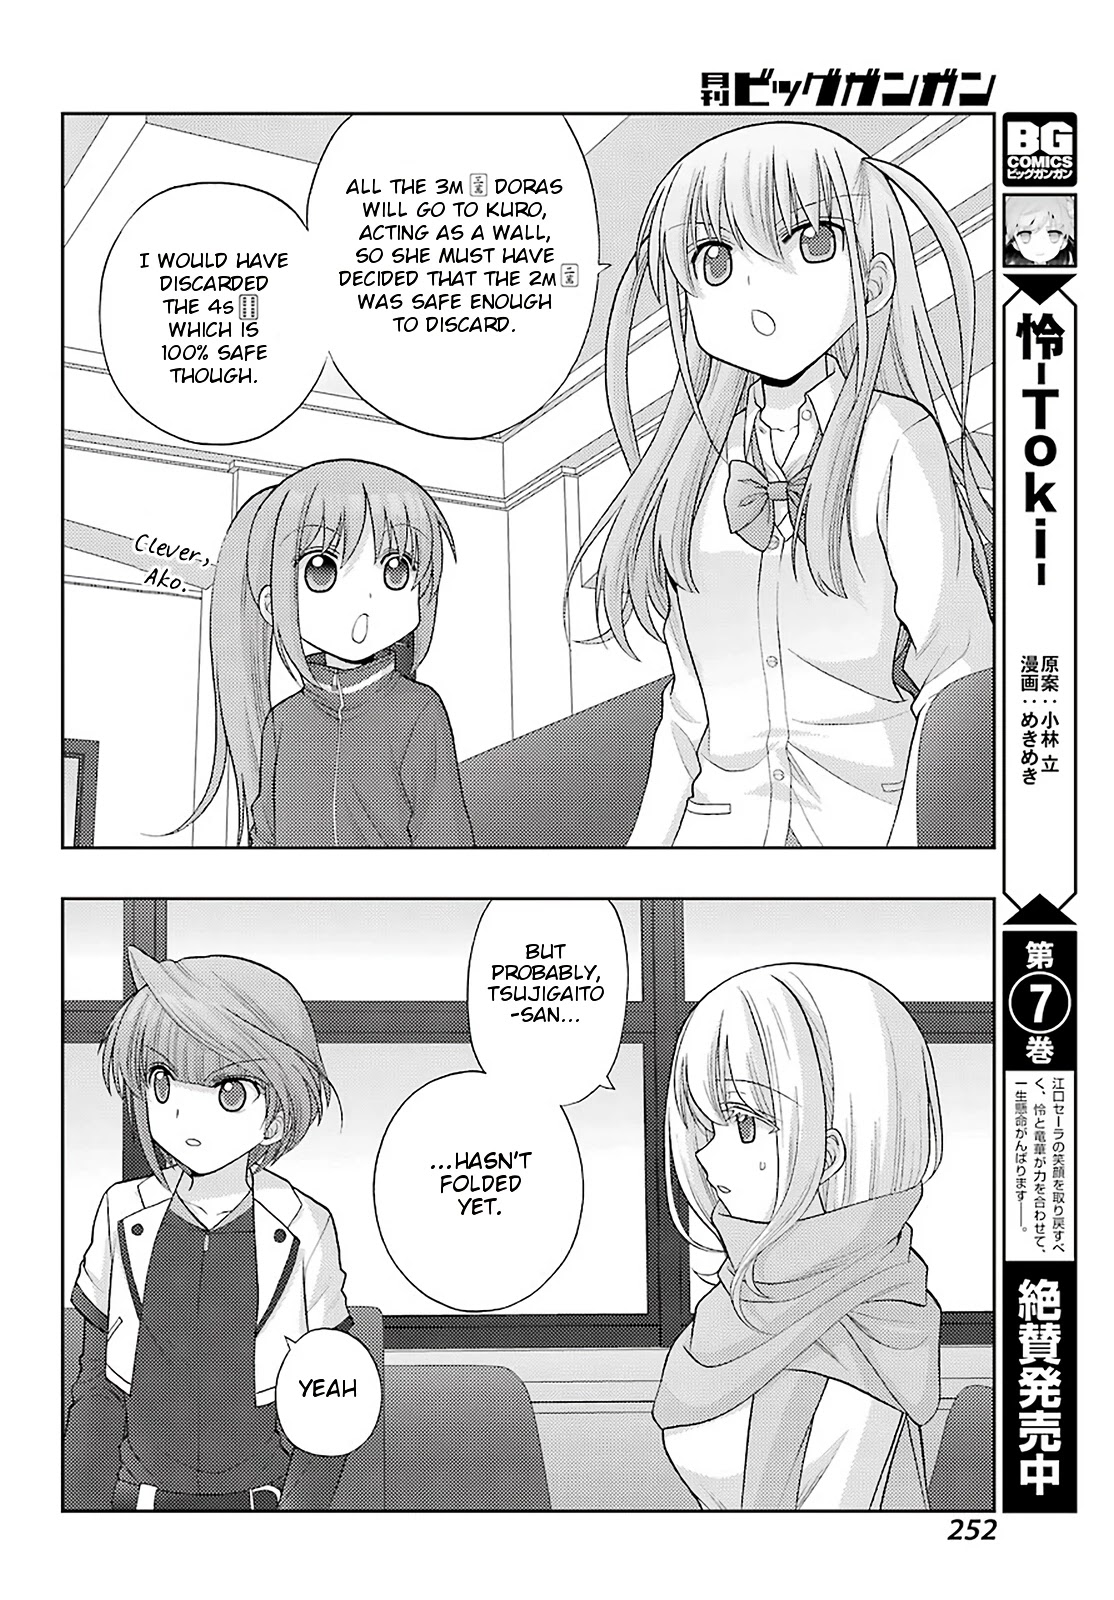 Saki: Achiga-Hen - Episode Of Side-A - New Series - chapter 33 - #5